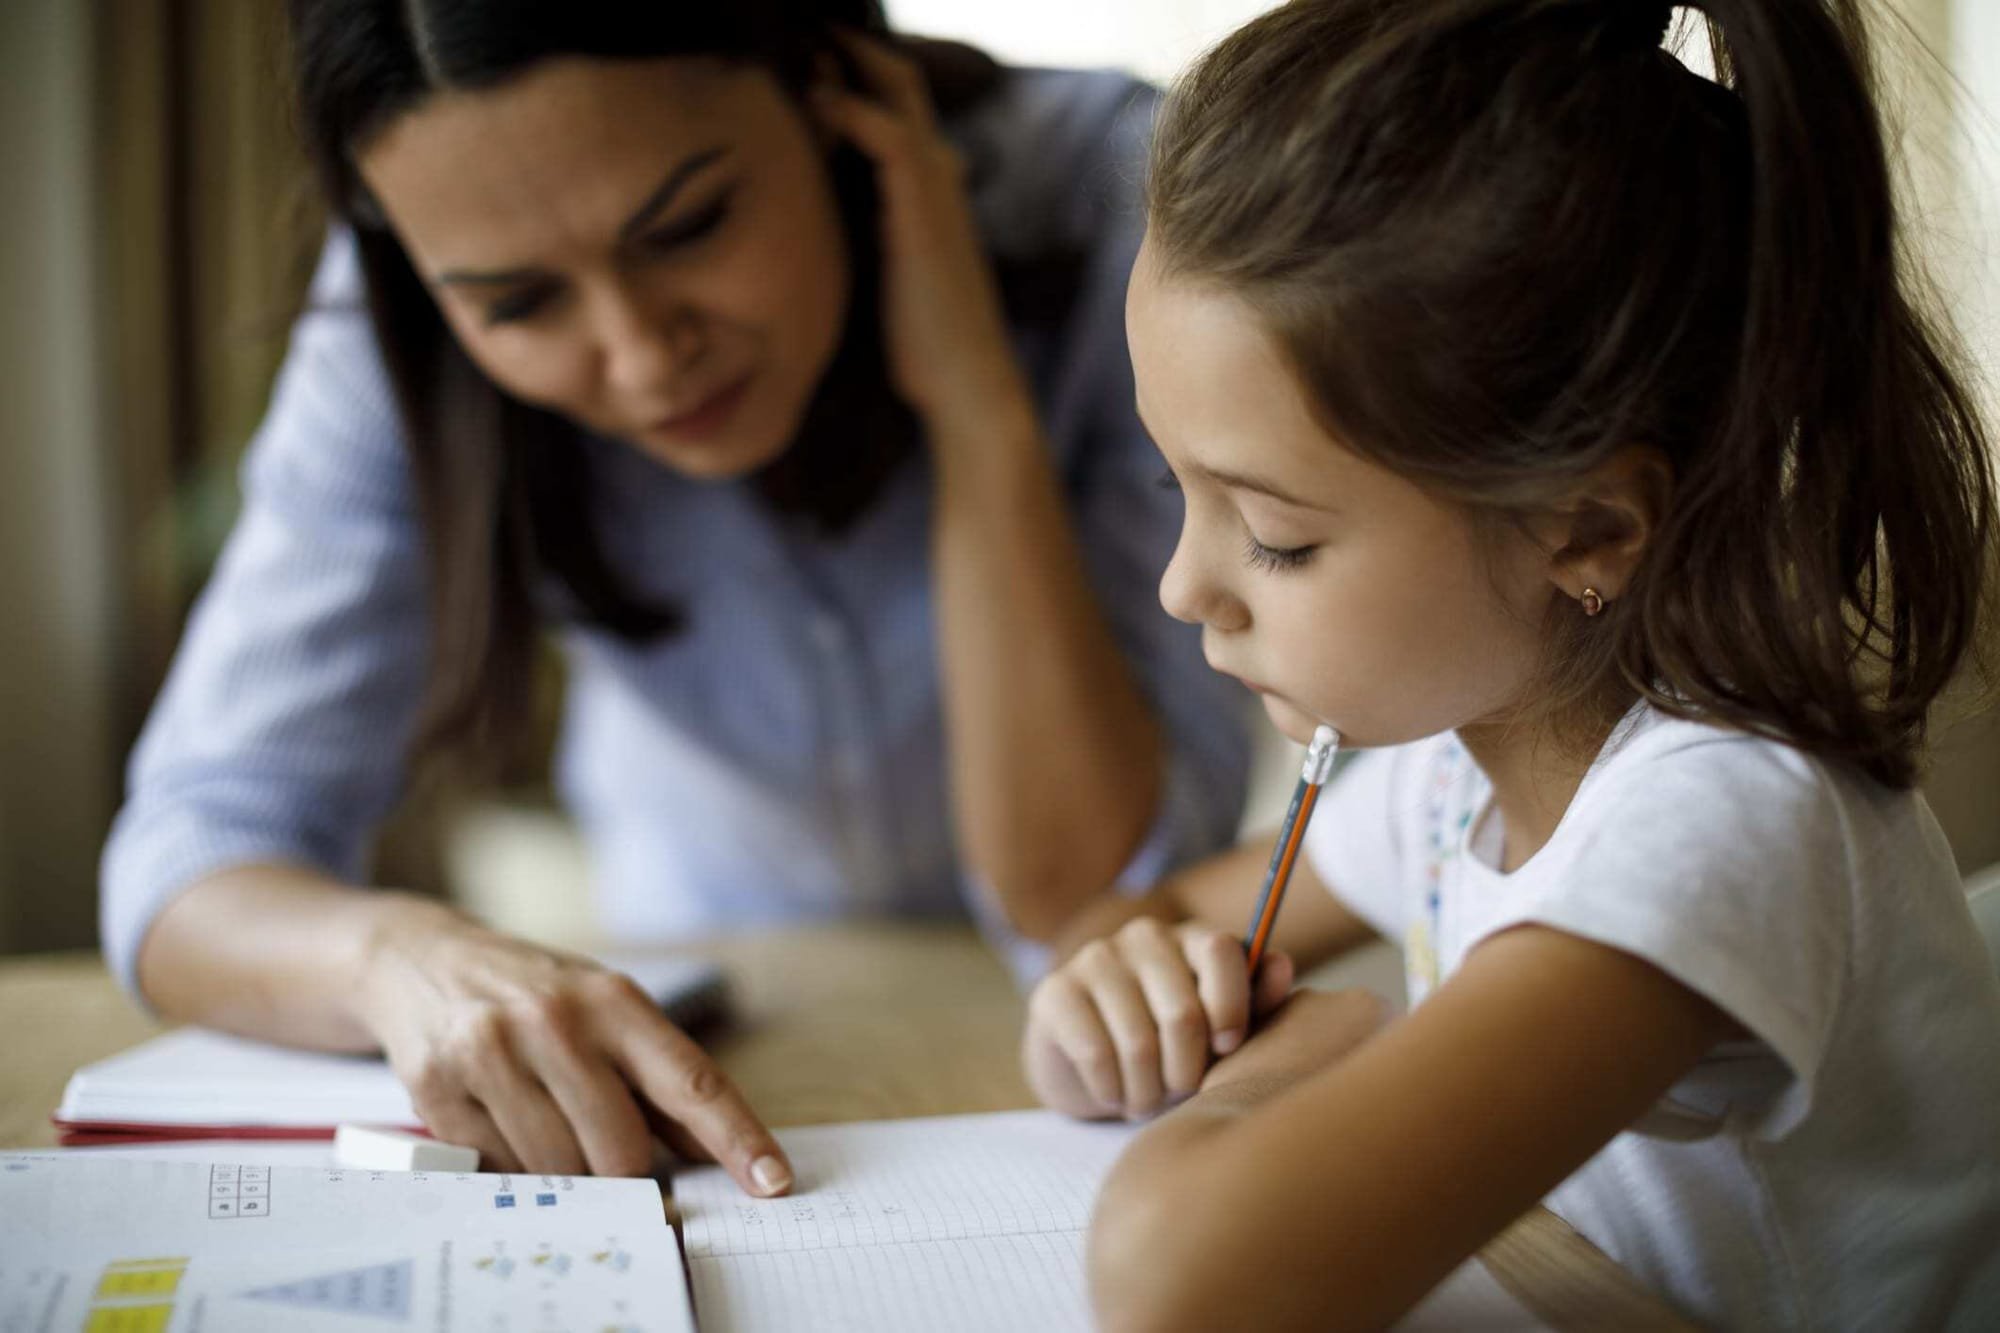 Hire a Tutor for Your Child